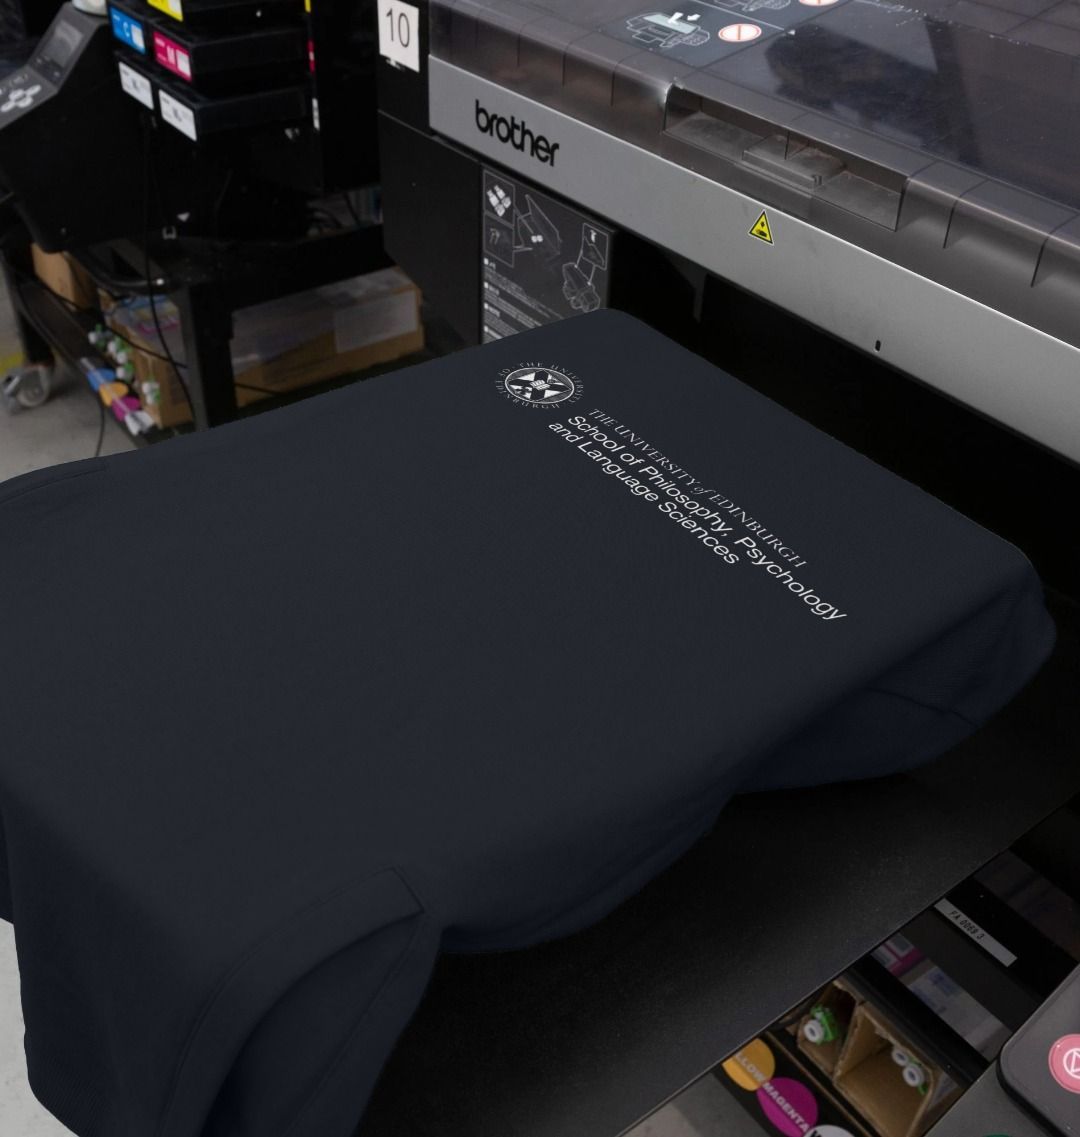 Our School of Philosophy, Psychology and Language Sciences Hoodie being printed by our print on demand partner, teemill.